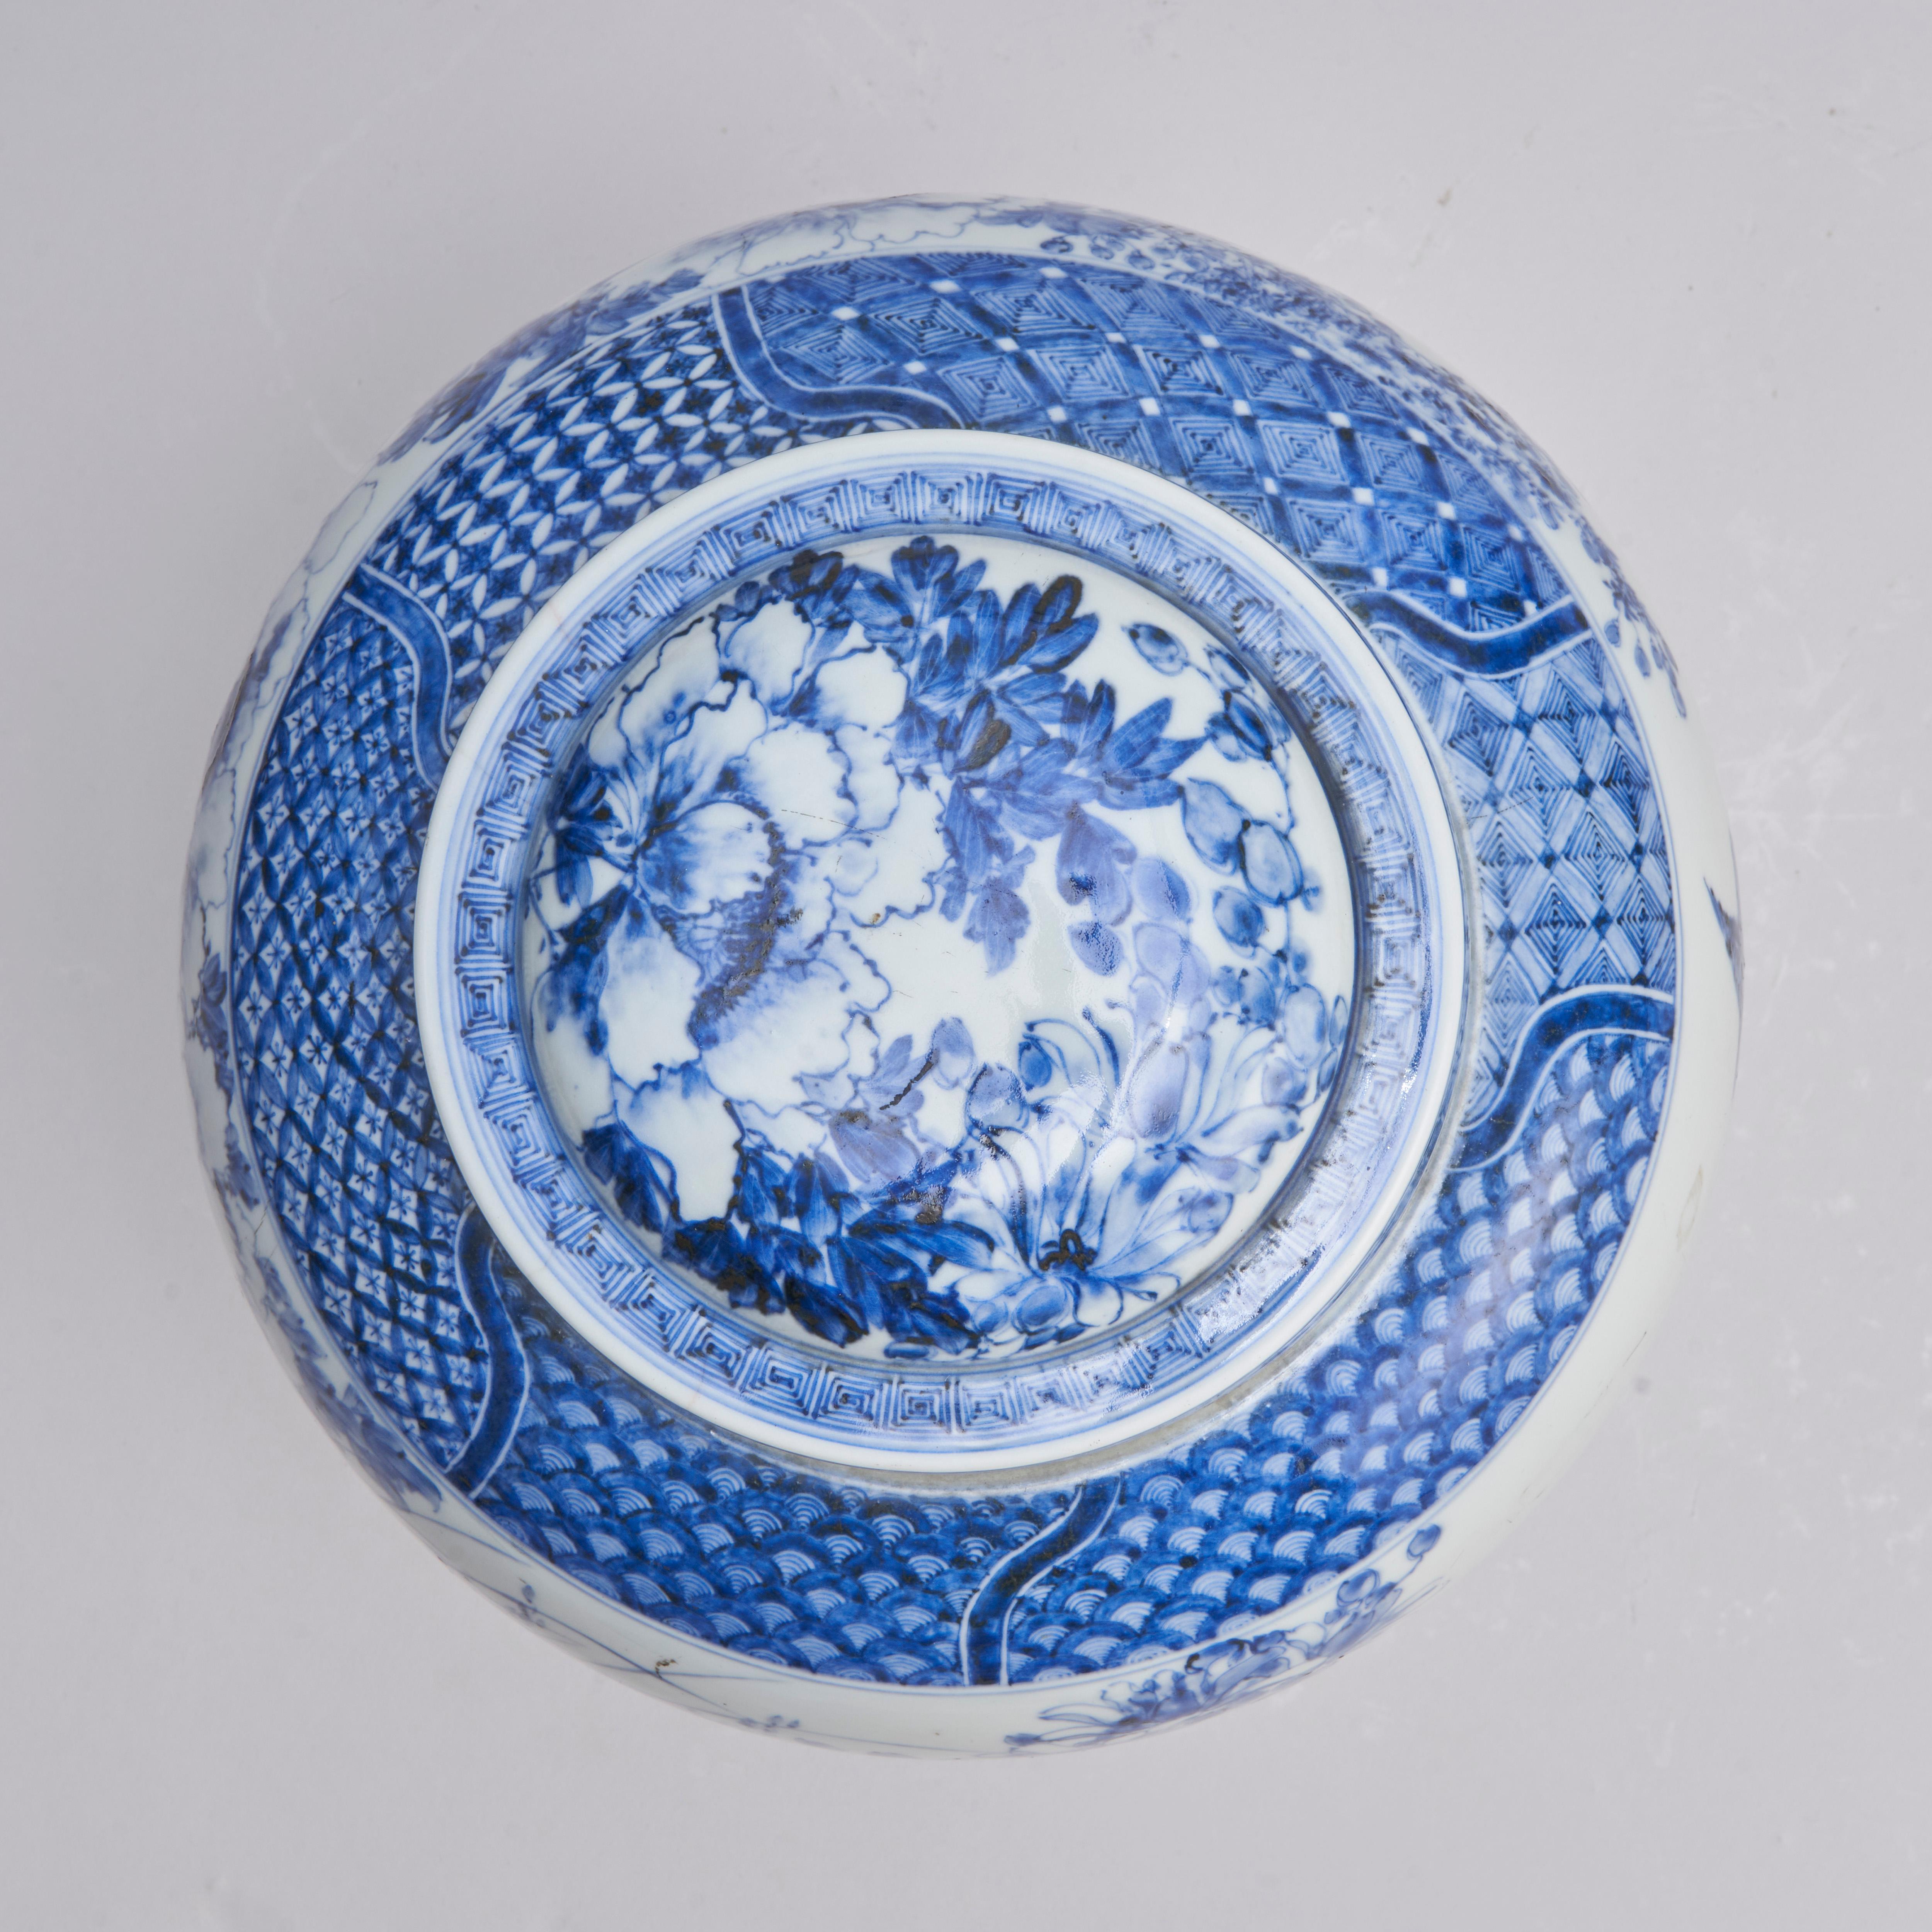 Porcelain An unusual Japanese porcelain blue and white jar with inner stopper For Sale